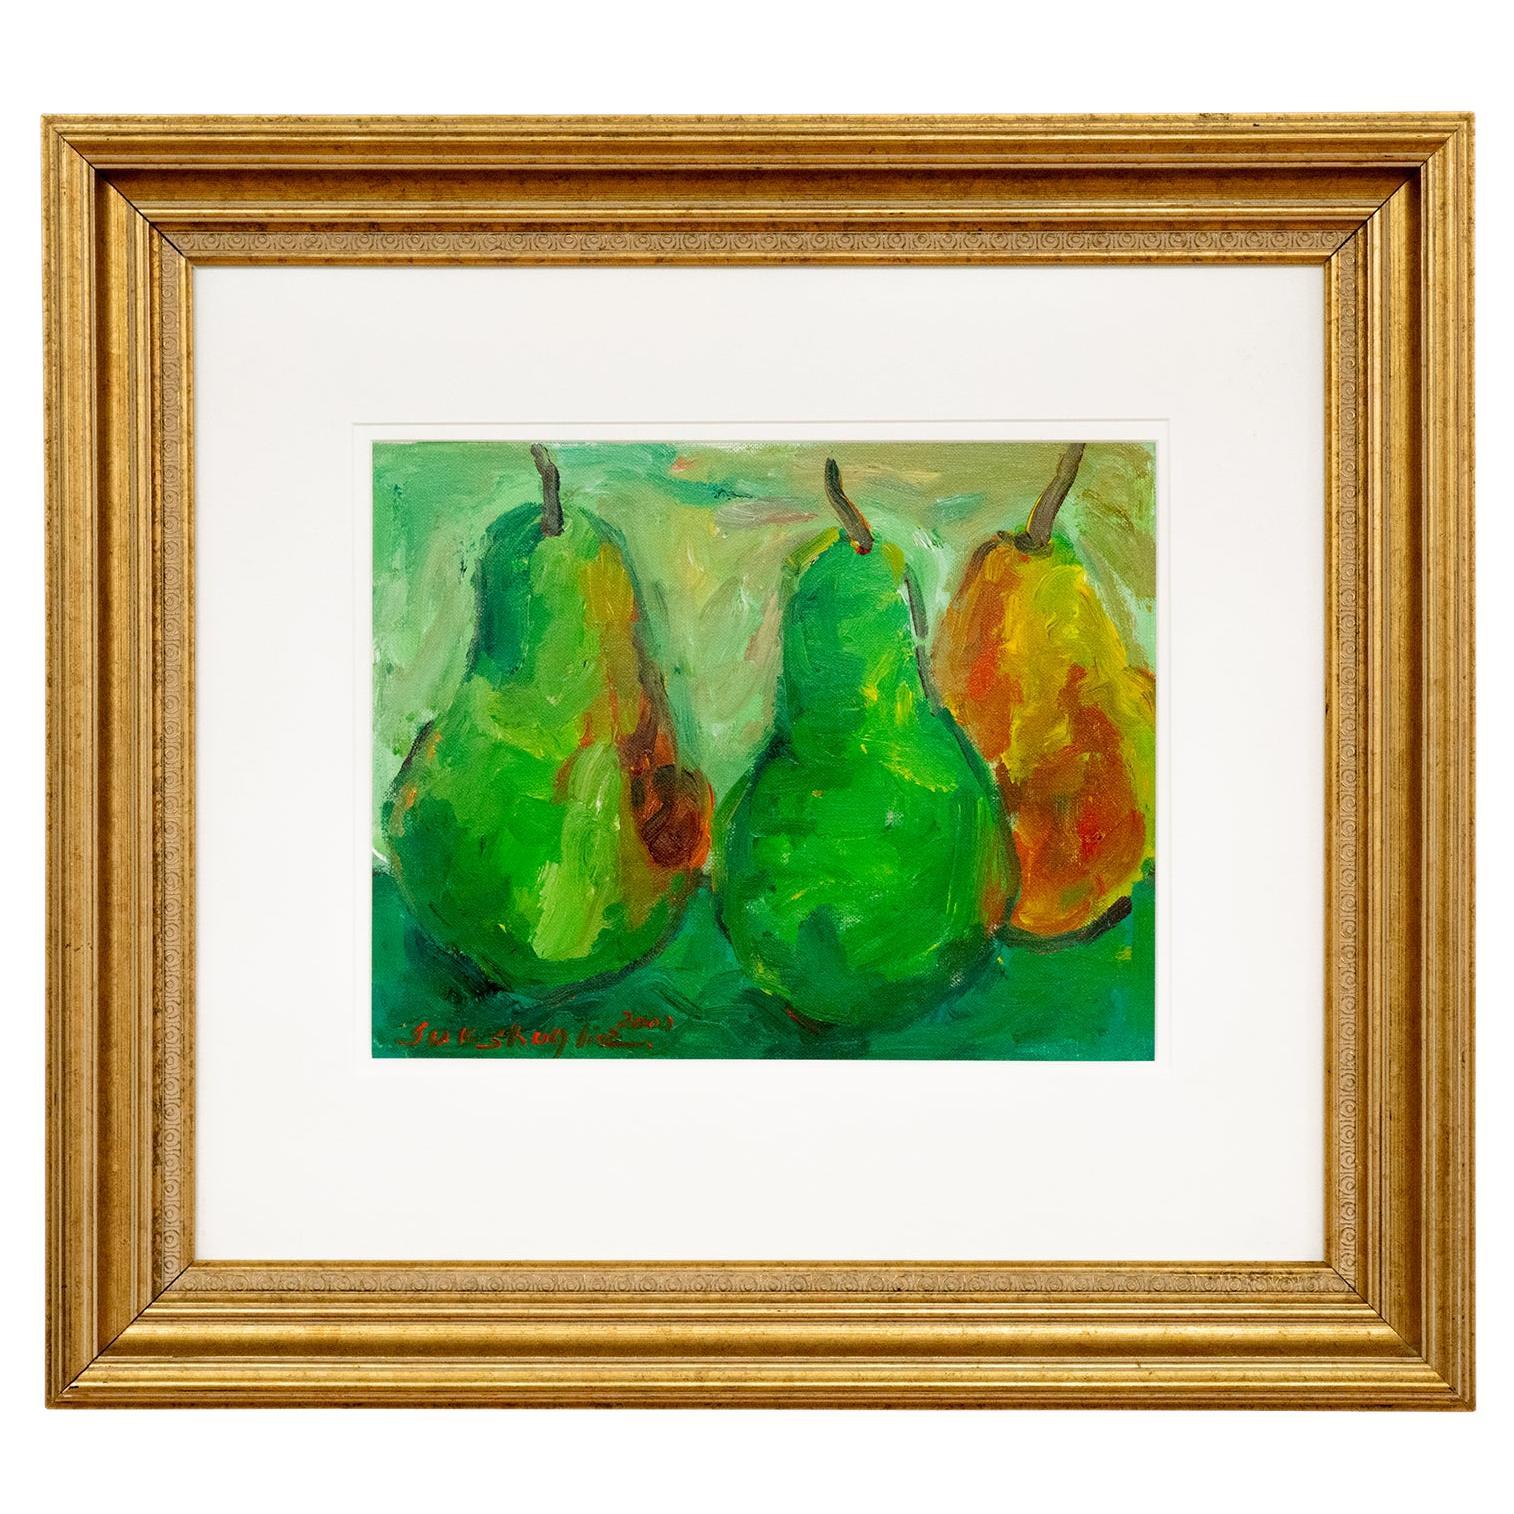 "Three Pears" by Suk Shuglie C2000, Acrylic on Paper and Canvas